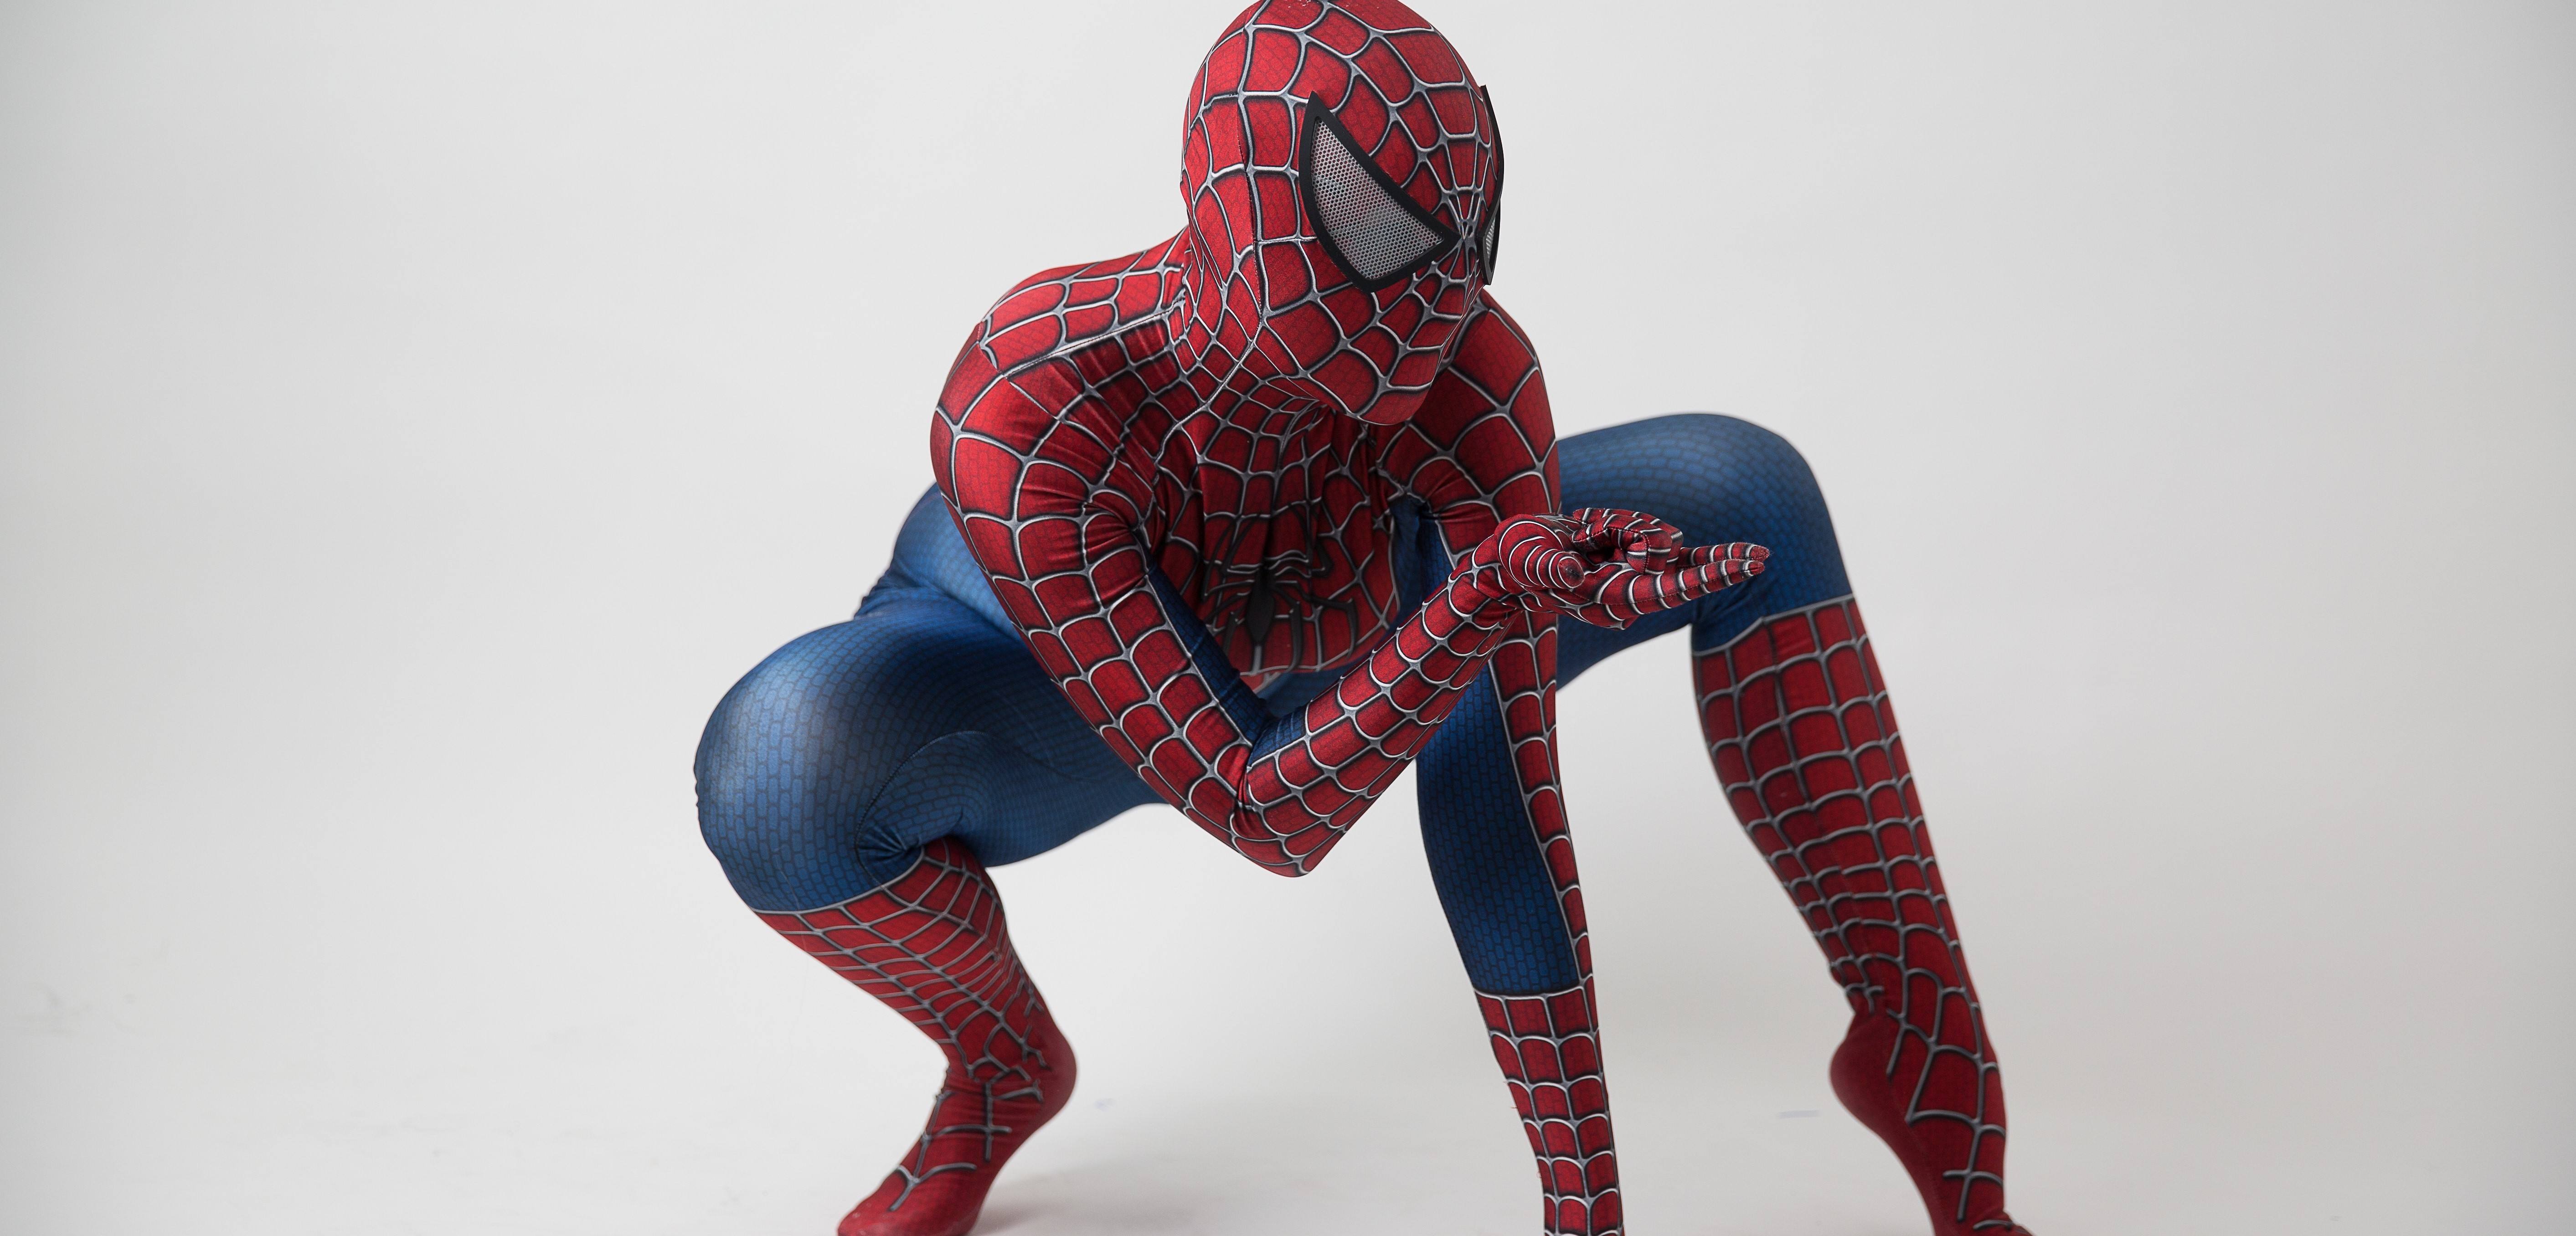 Spider-Man in a flexible position